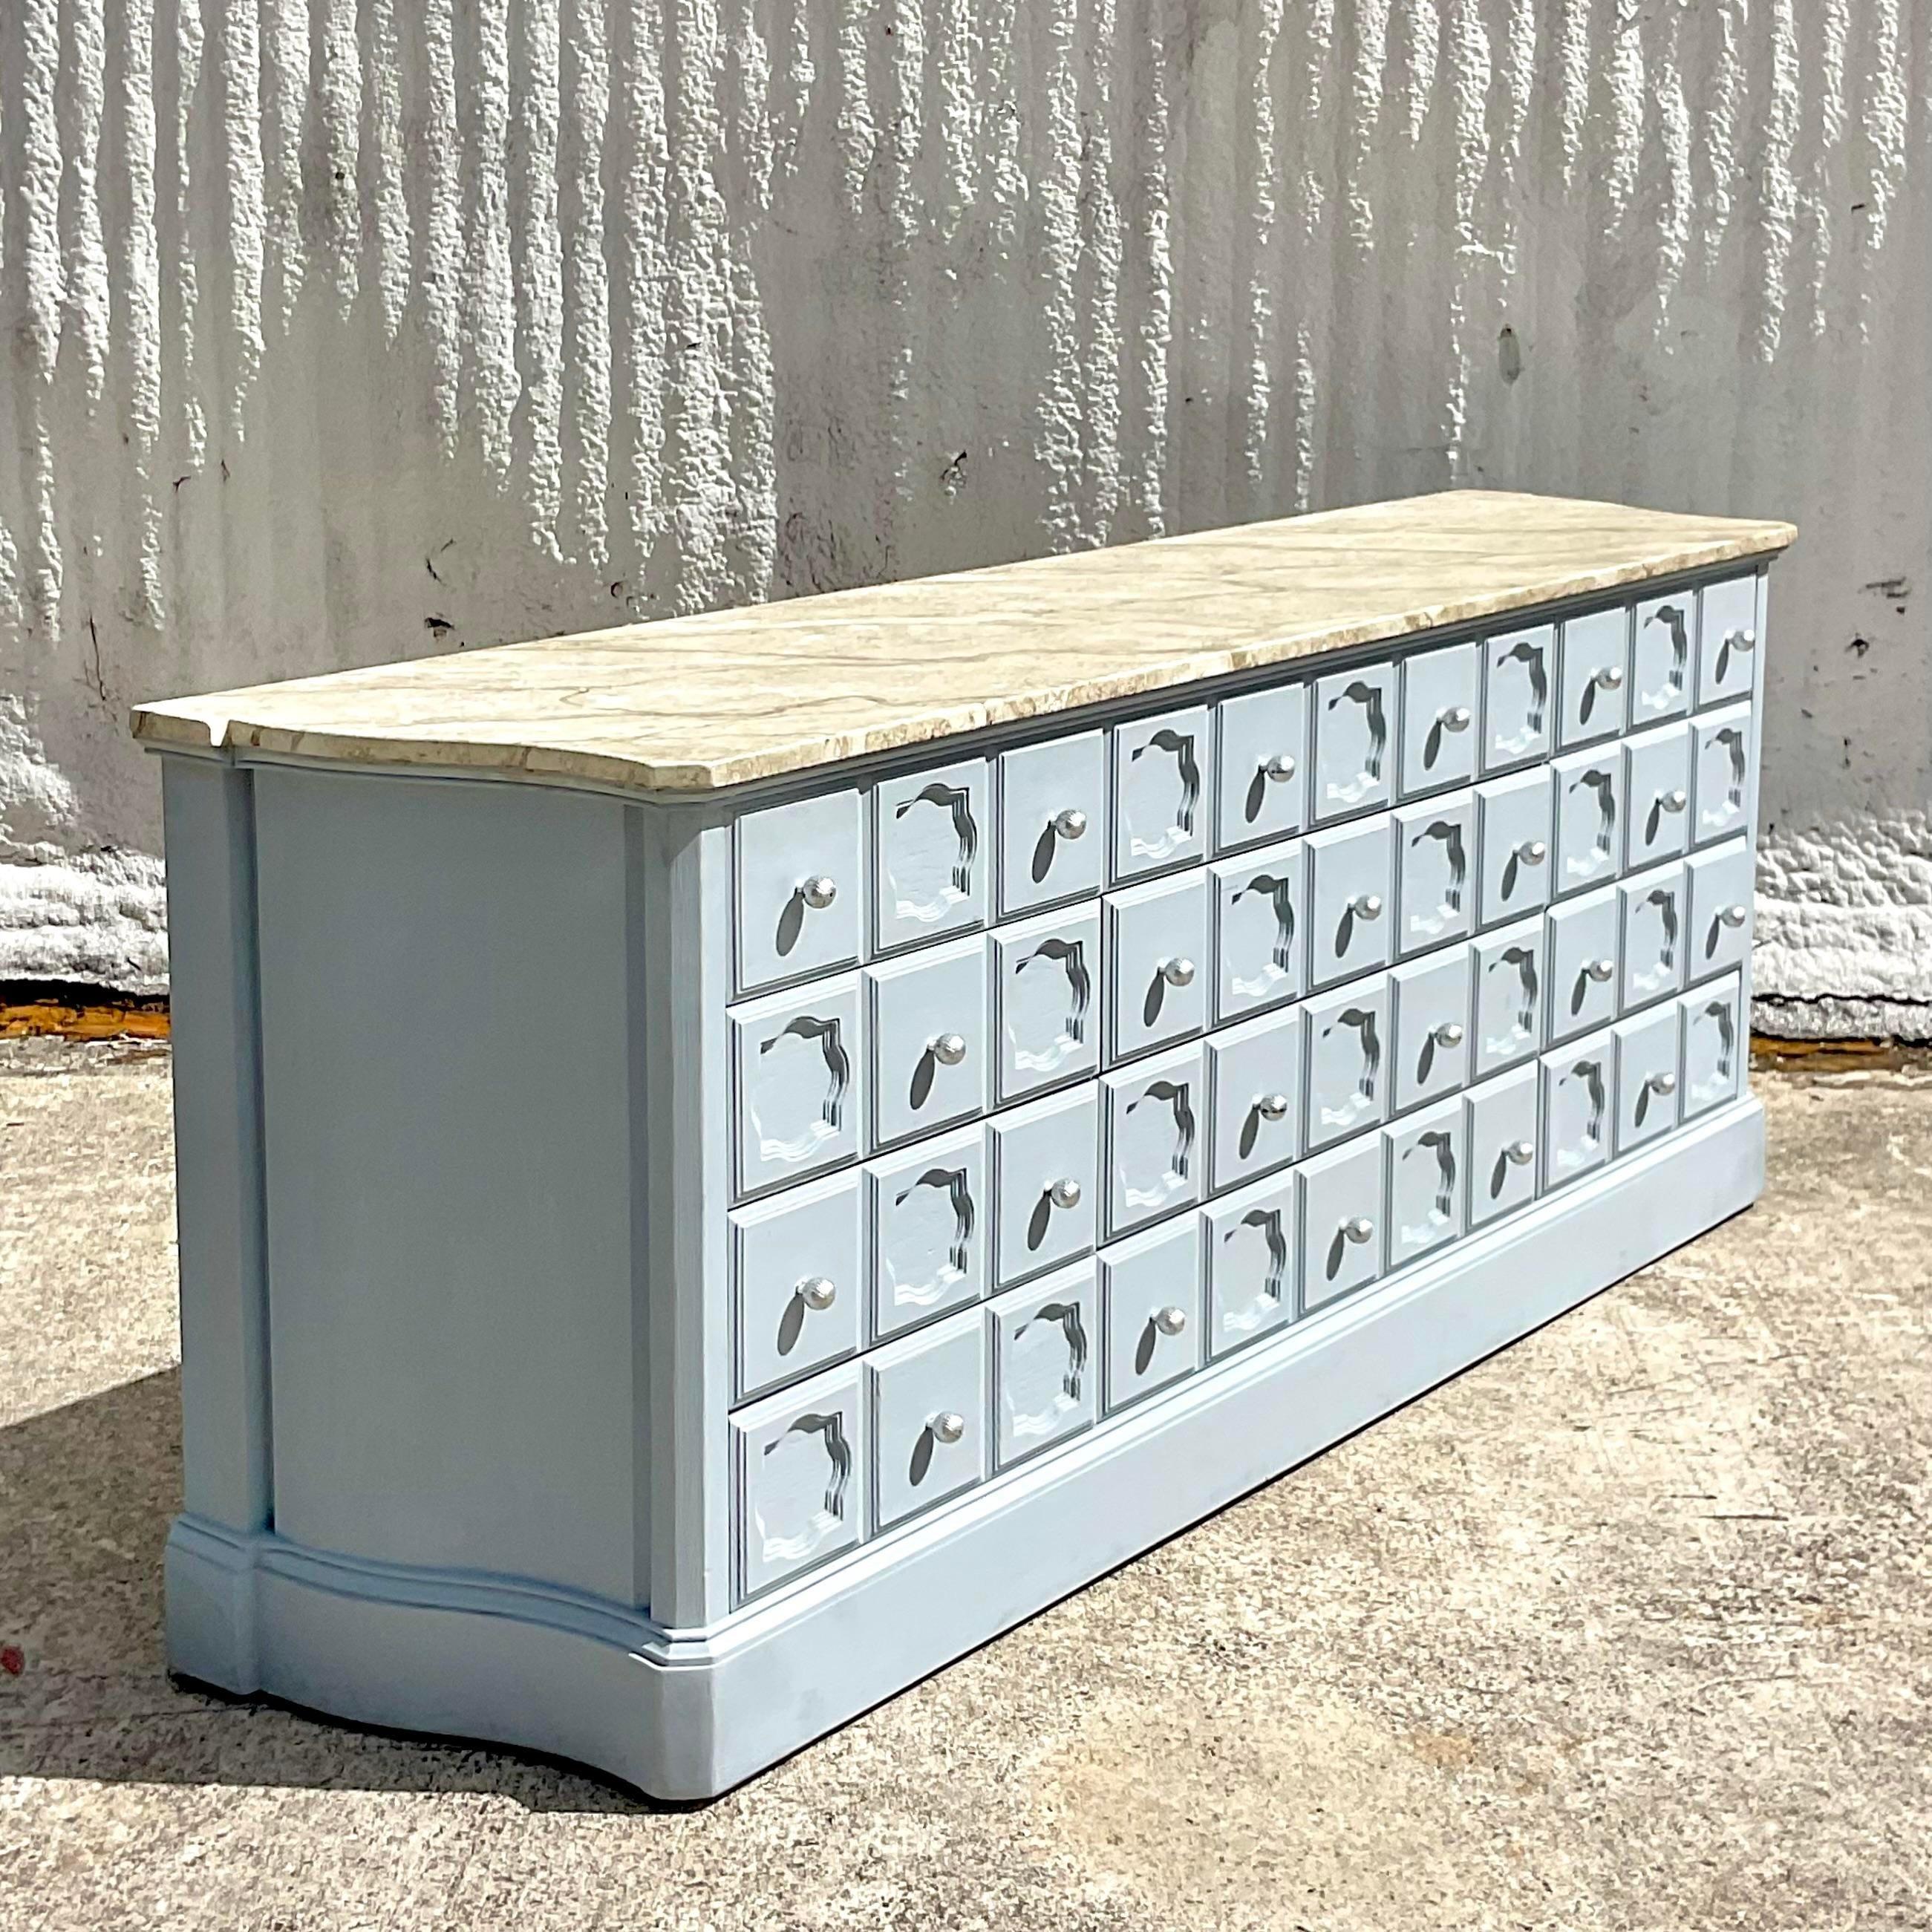 A spectacular Vintage Coastal credenza. A chic faux finish with a solid pale blue cabinet and a marbleized top. Lots of great storage below. Acquired from a Palm Beach estate.